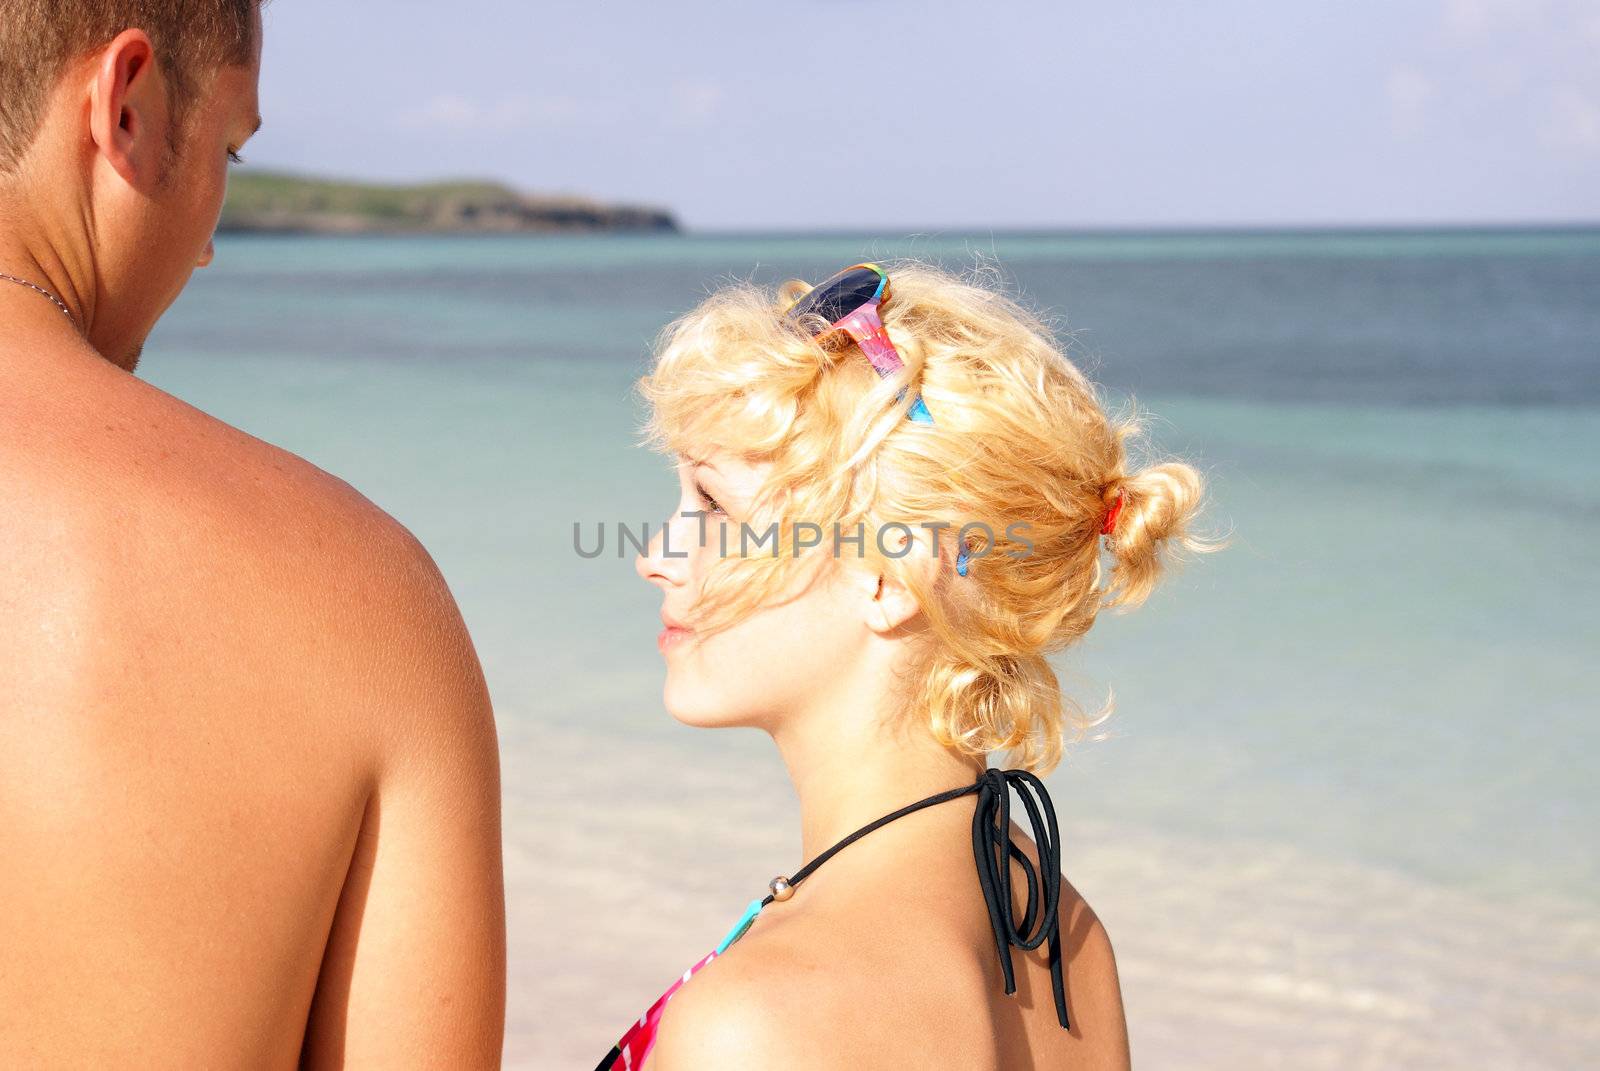 A young couple starring into each others eyes at the beach.